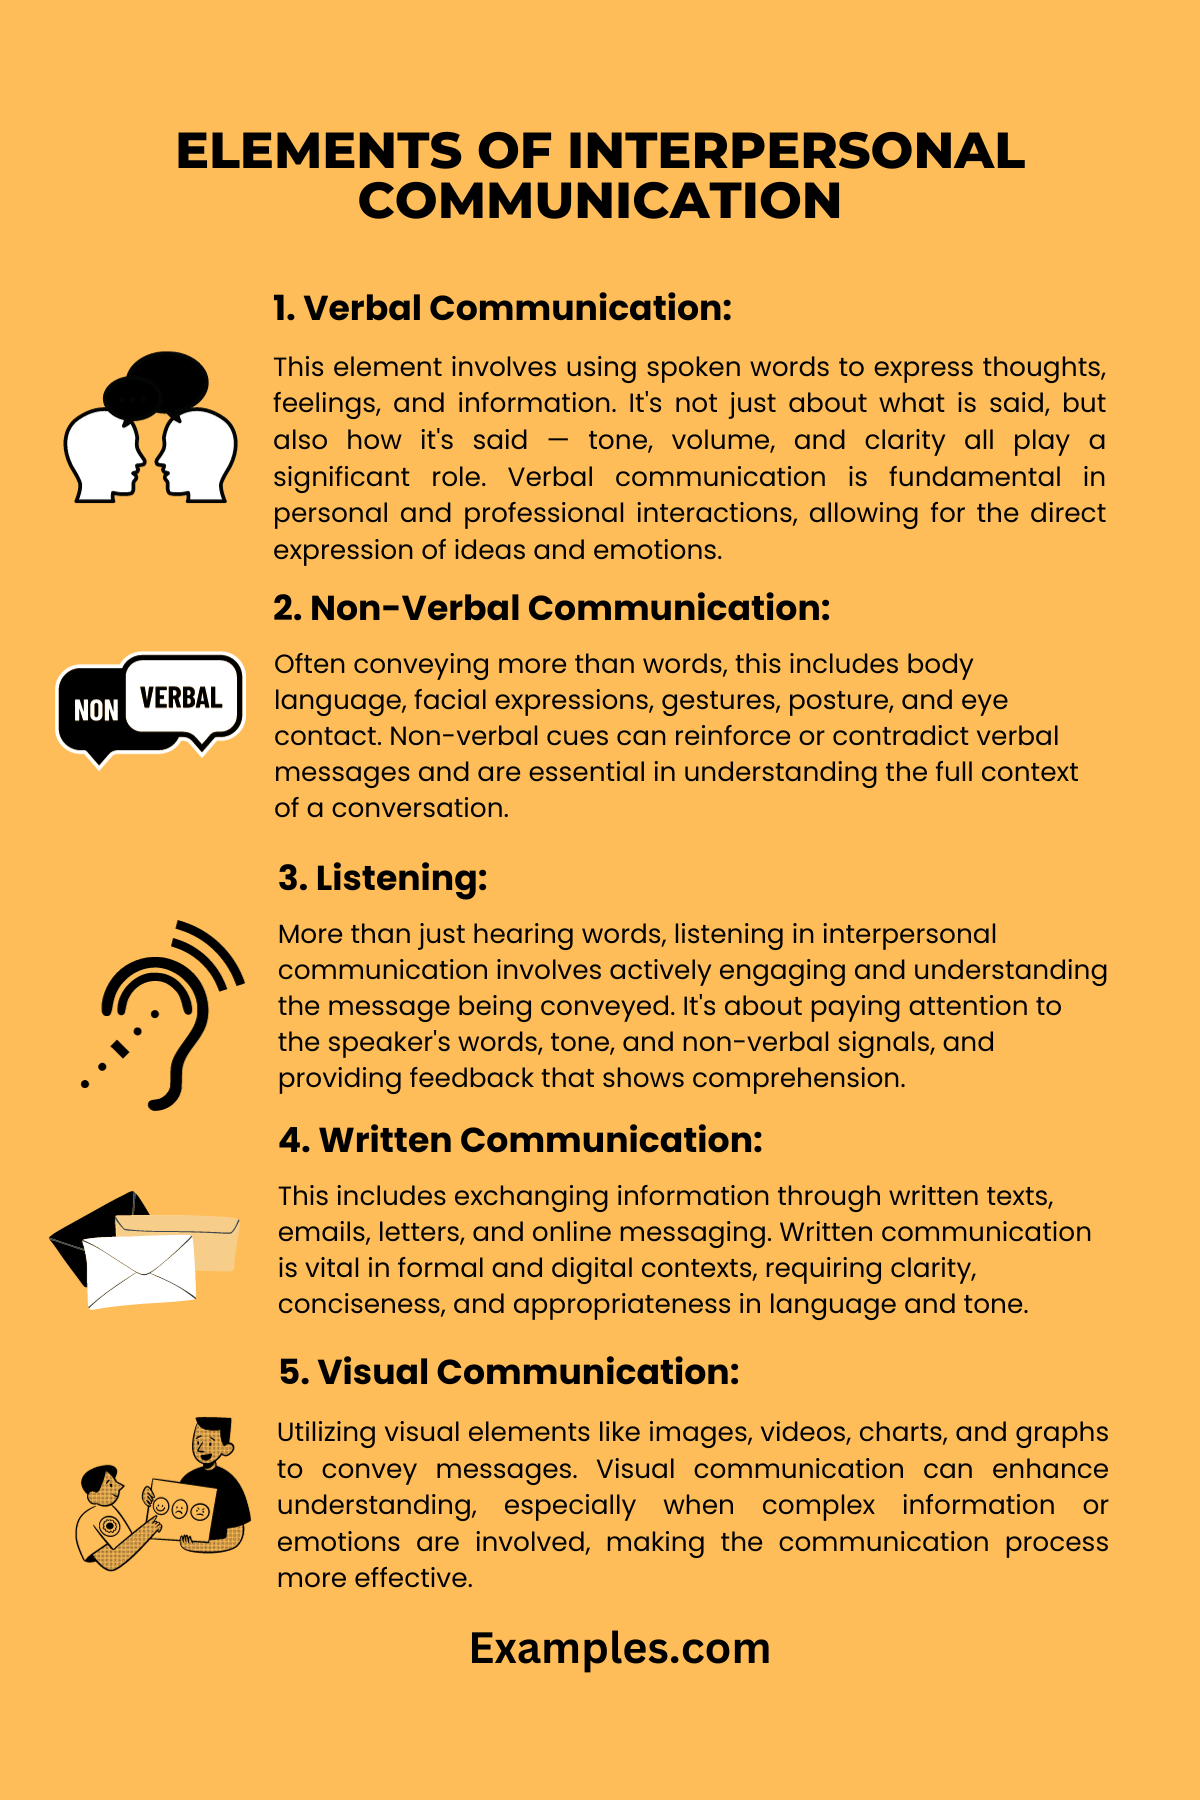 5 elements of interpersonal communication